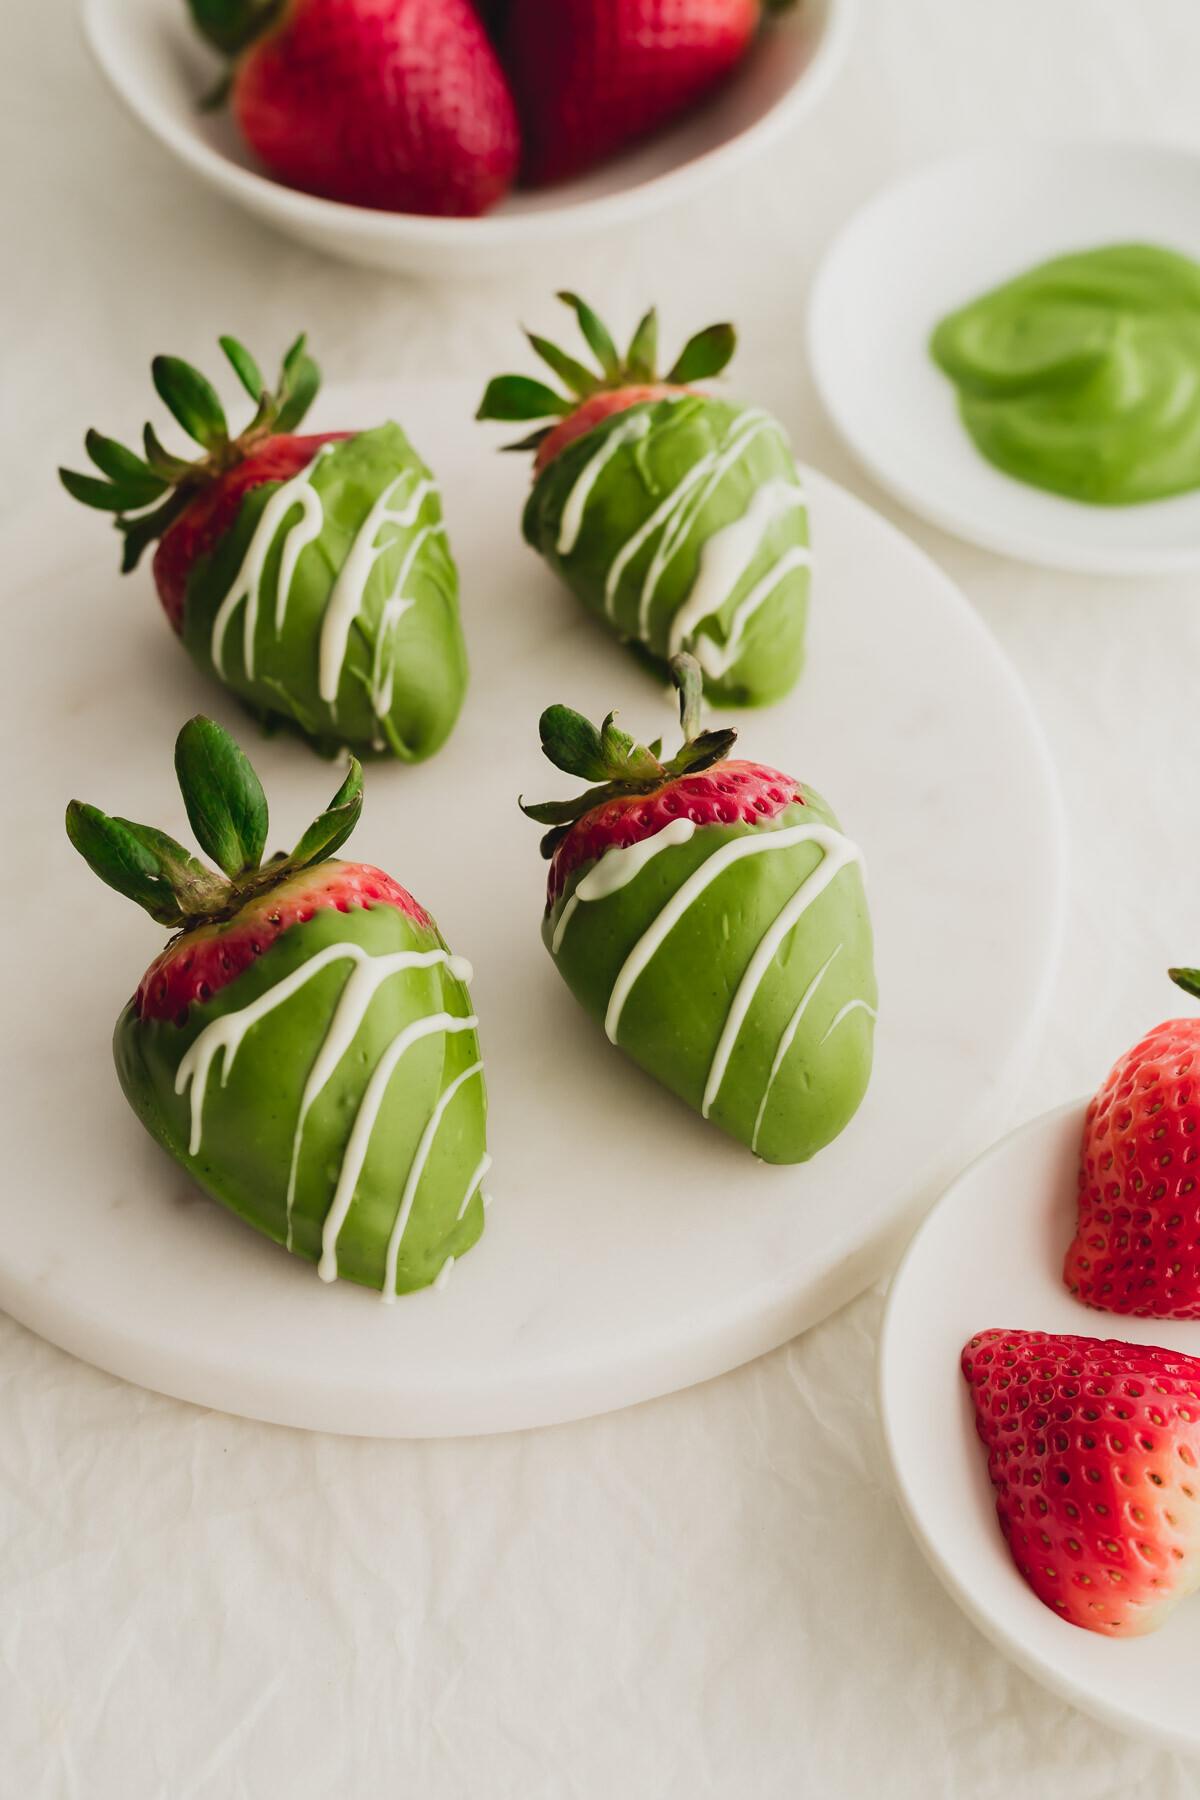 Matcha chocolate covered strawberries with a white chocolate drizzle